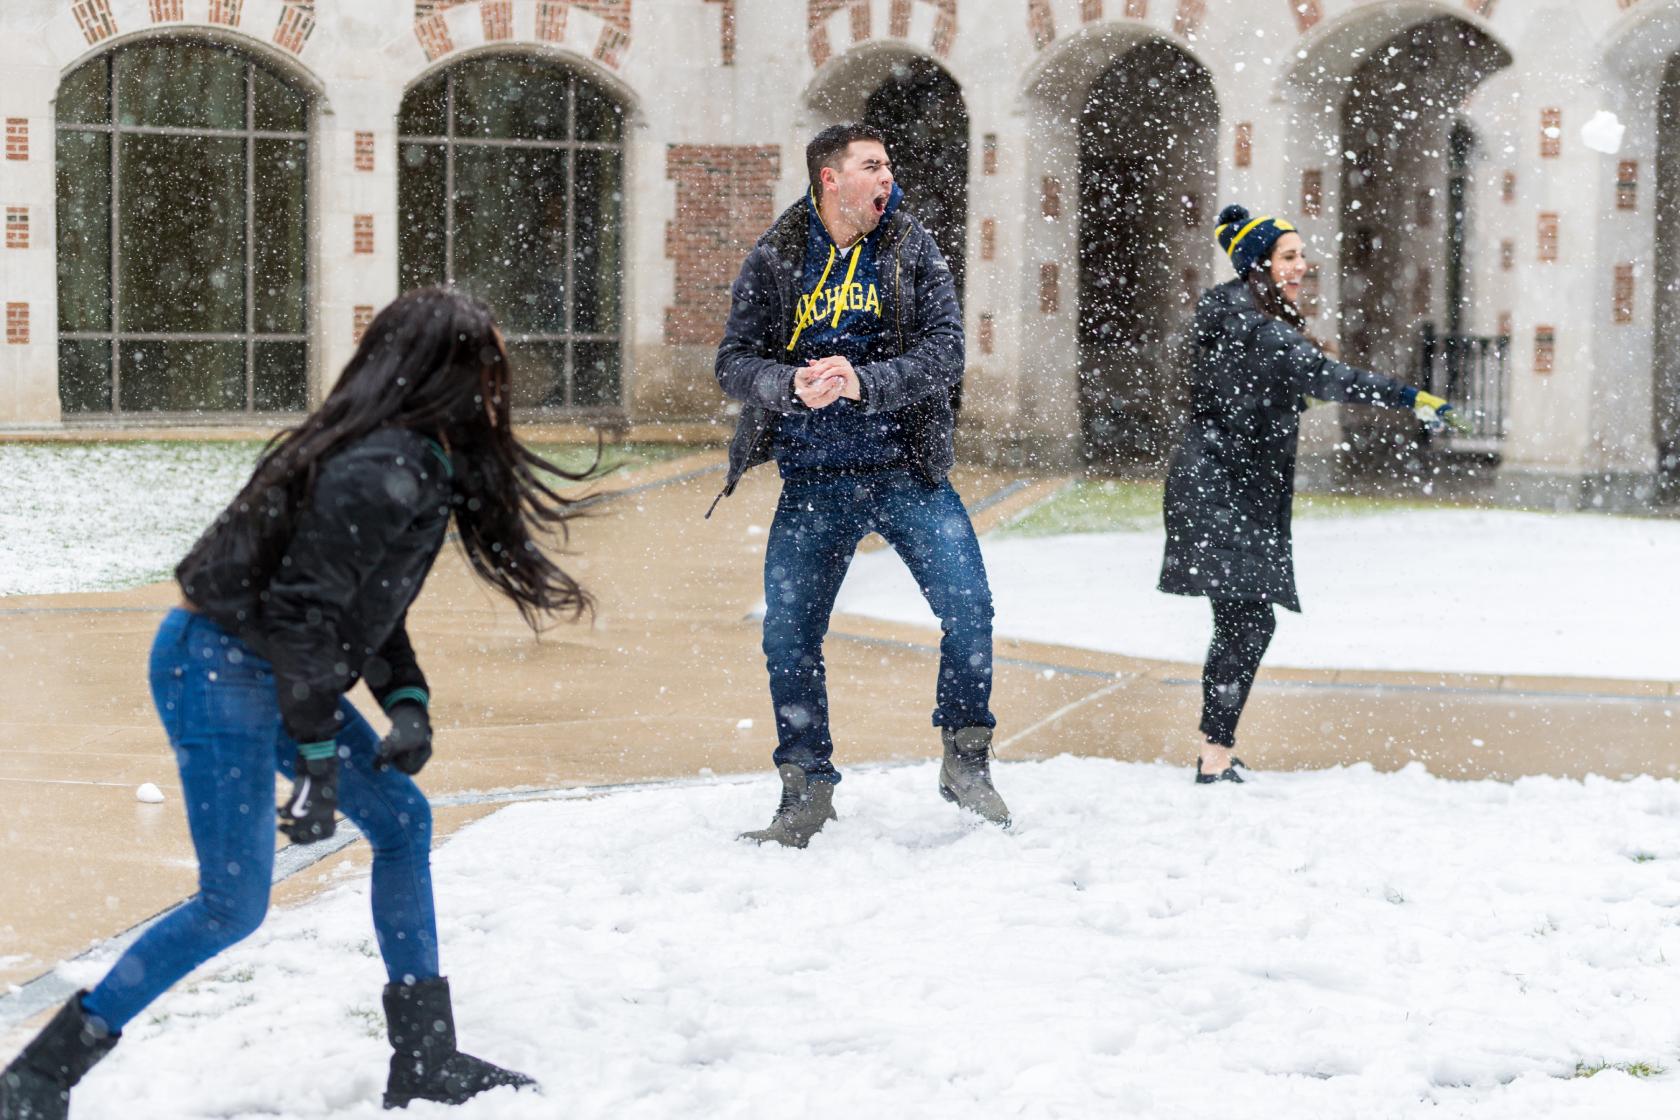 Central campus snowball fight